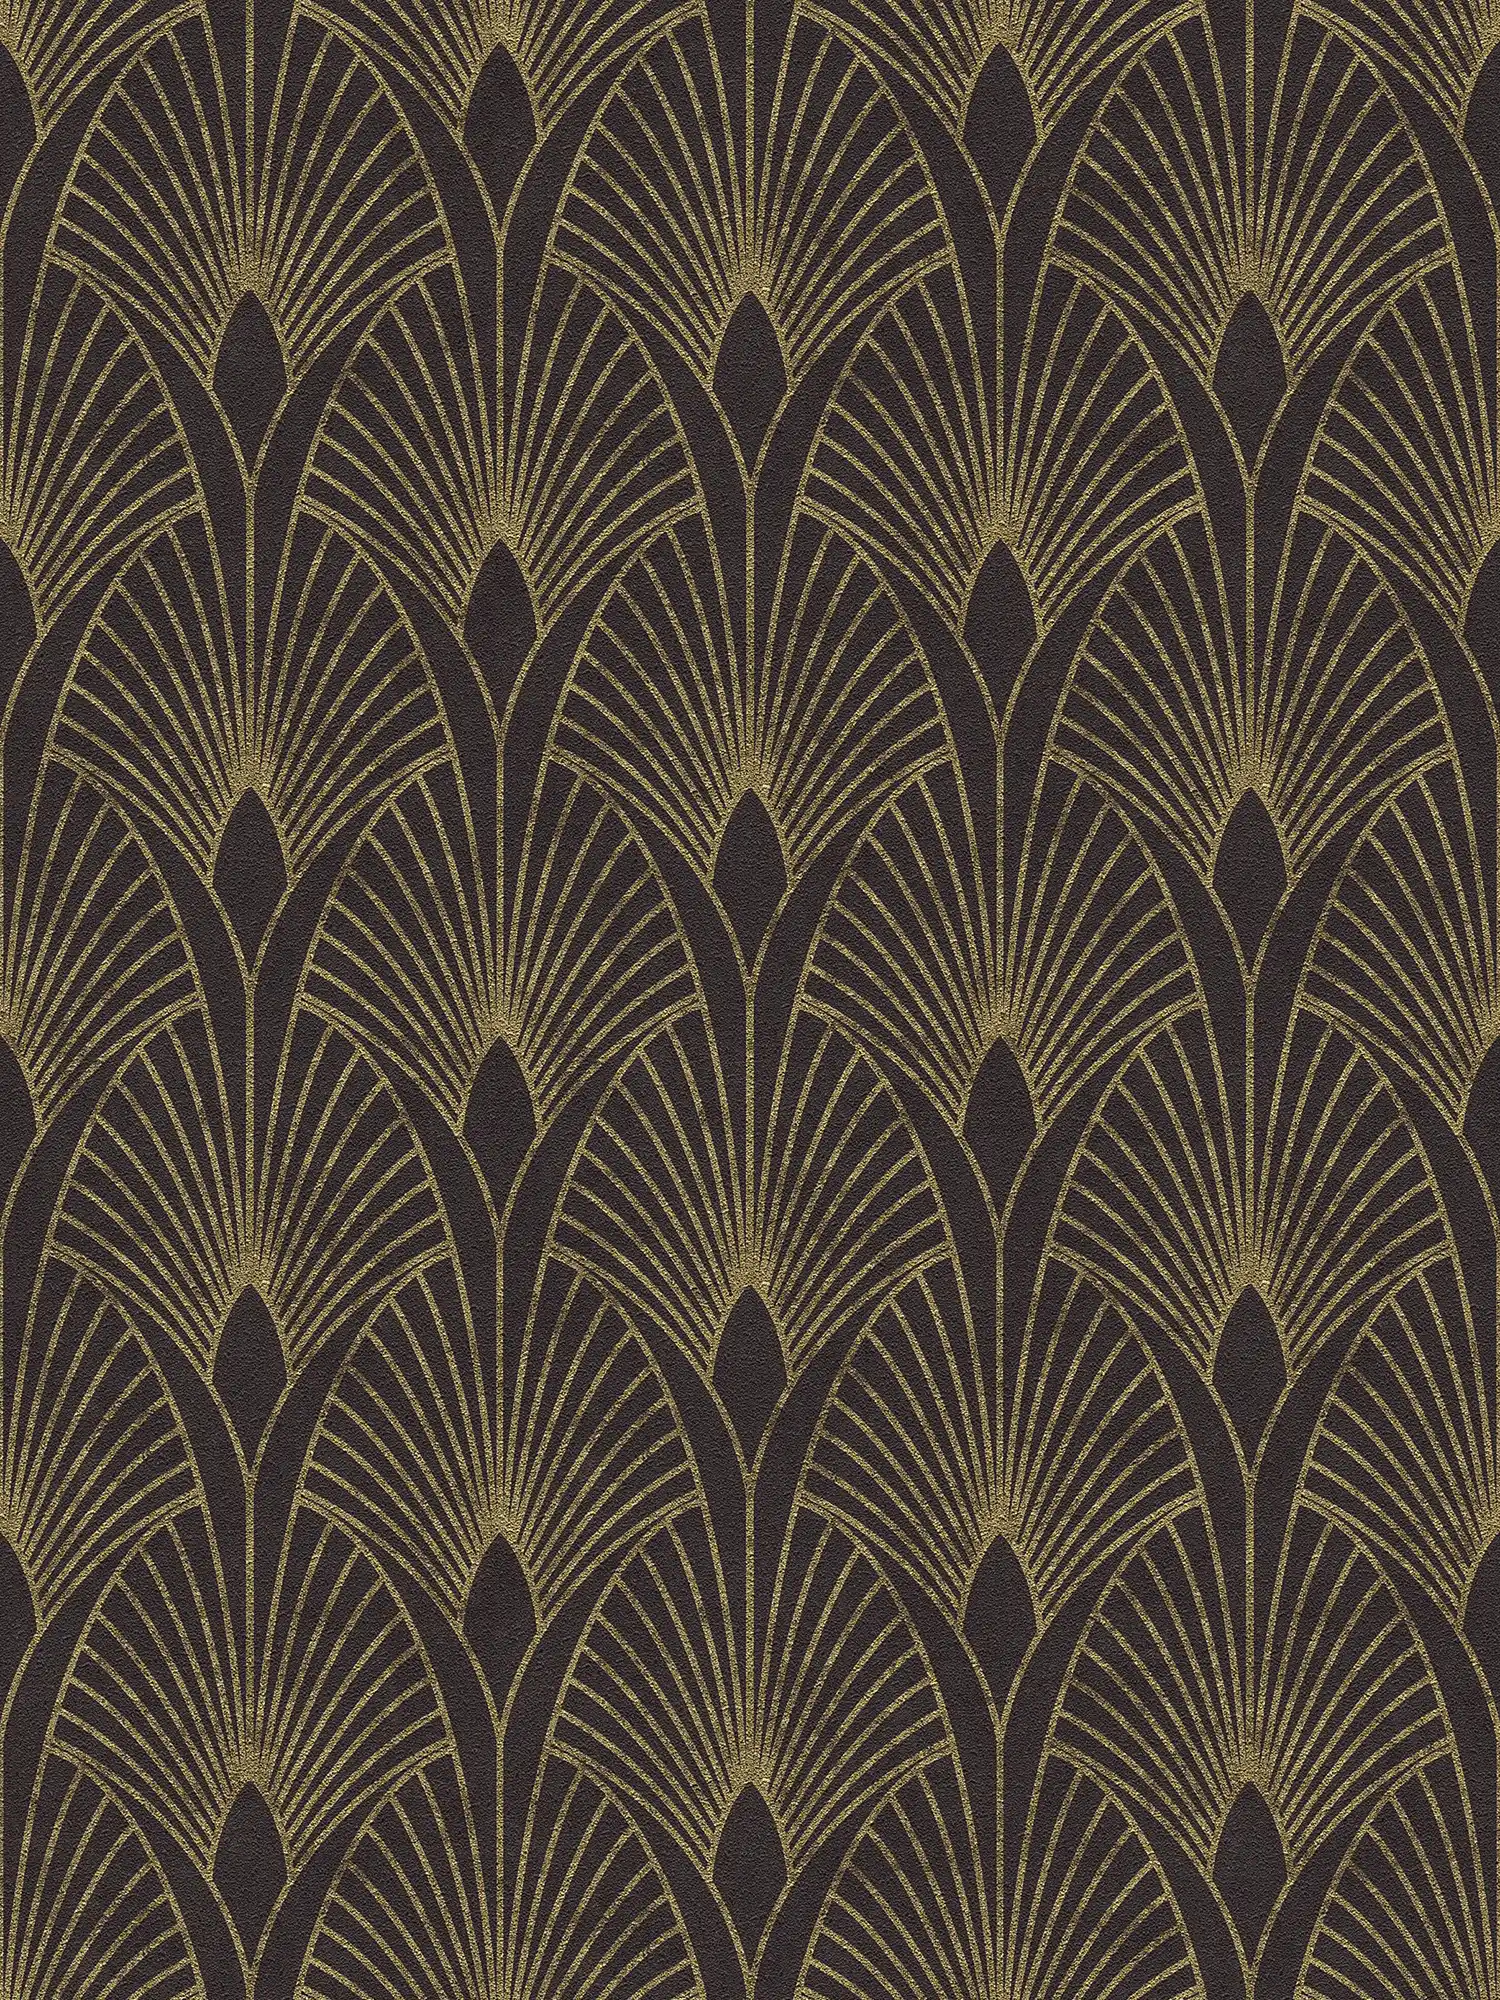 Art deco wallpaper with gold accents - black, gold
